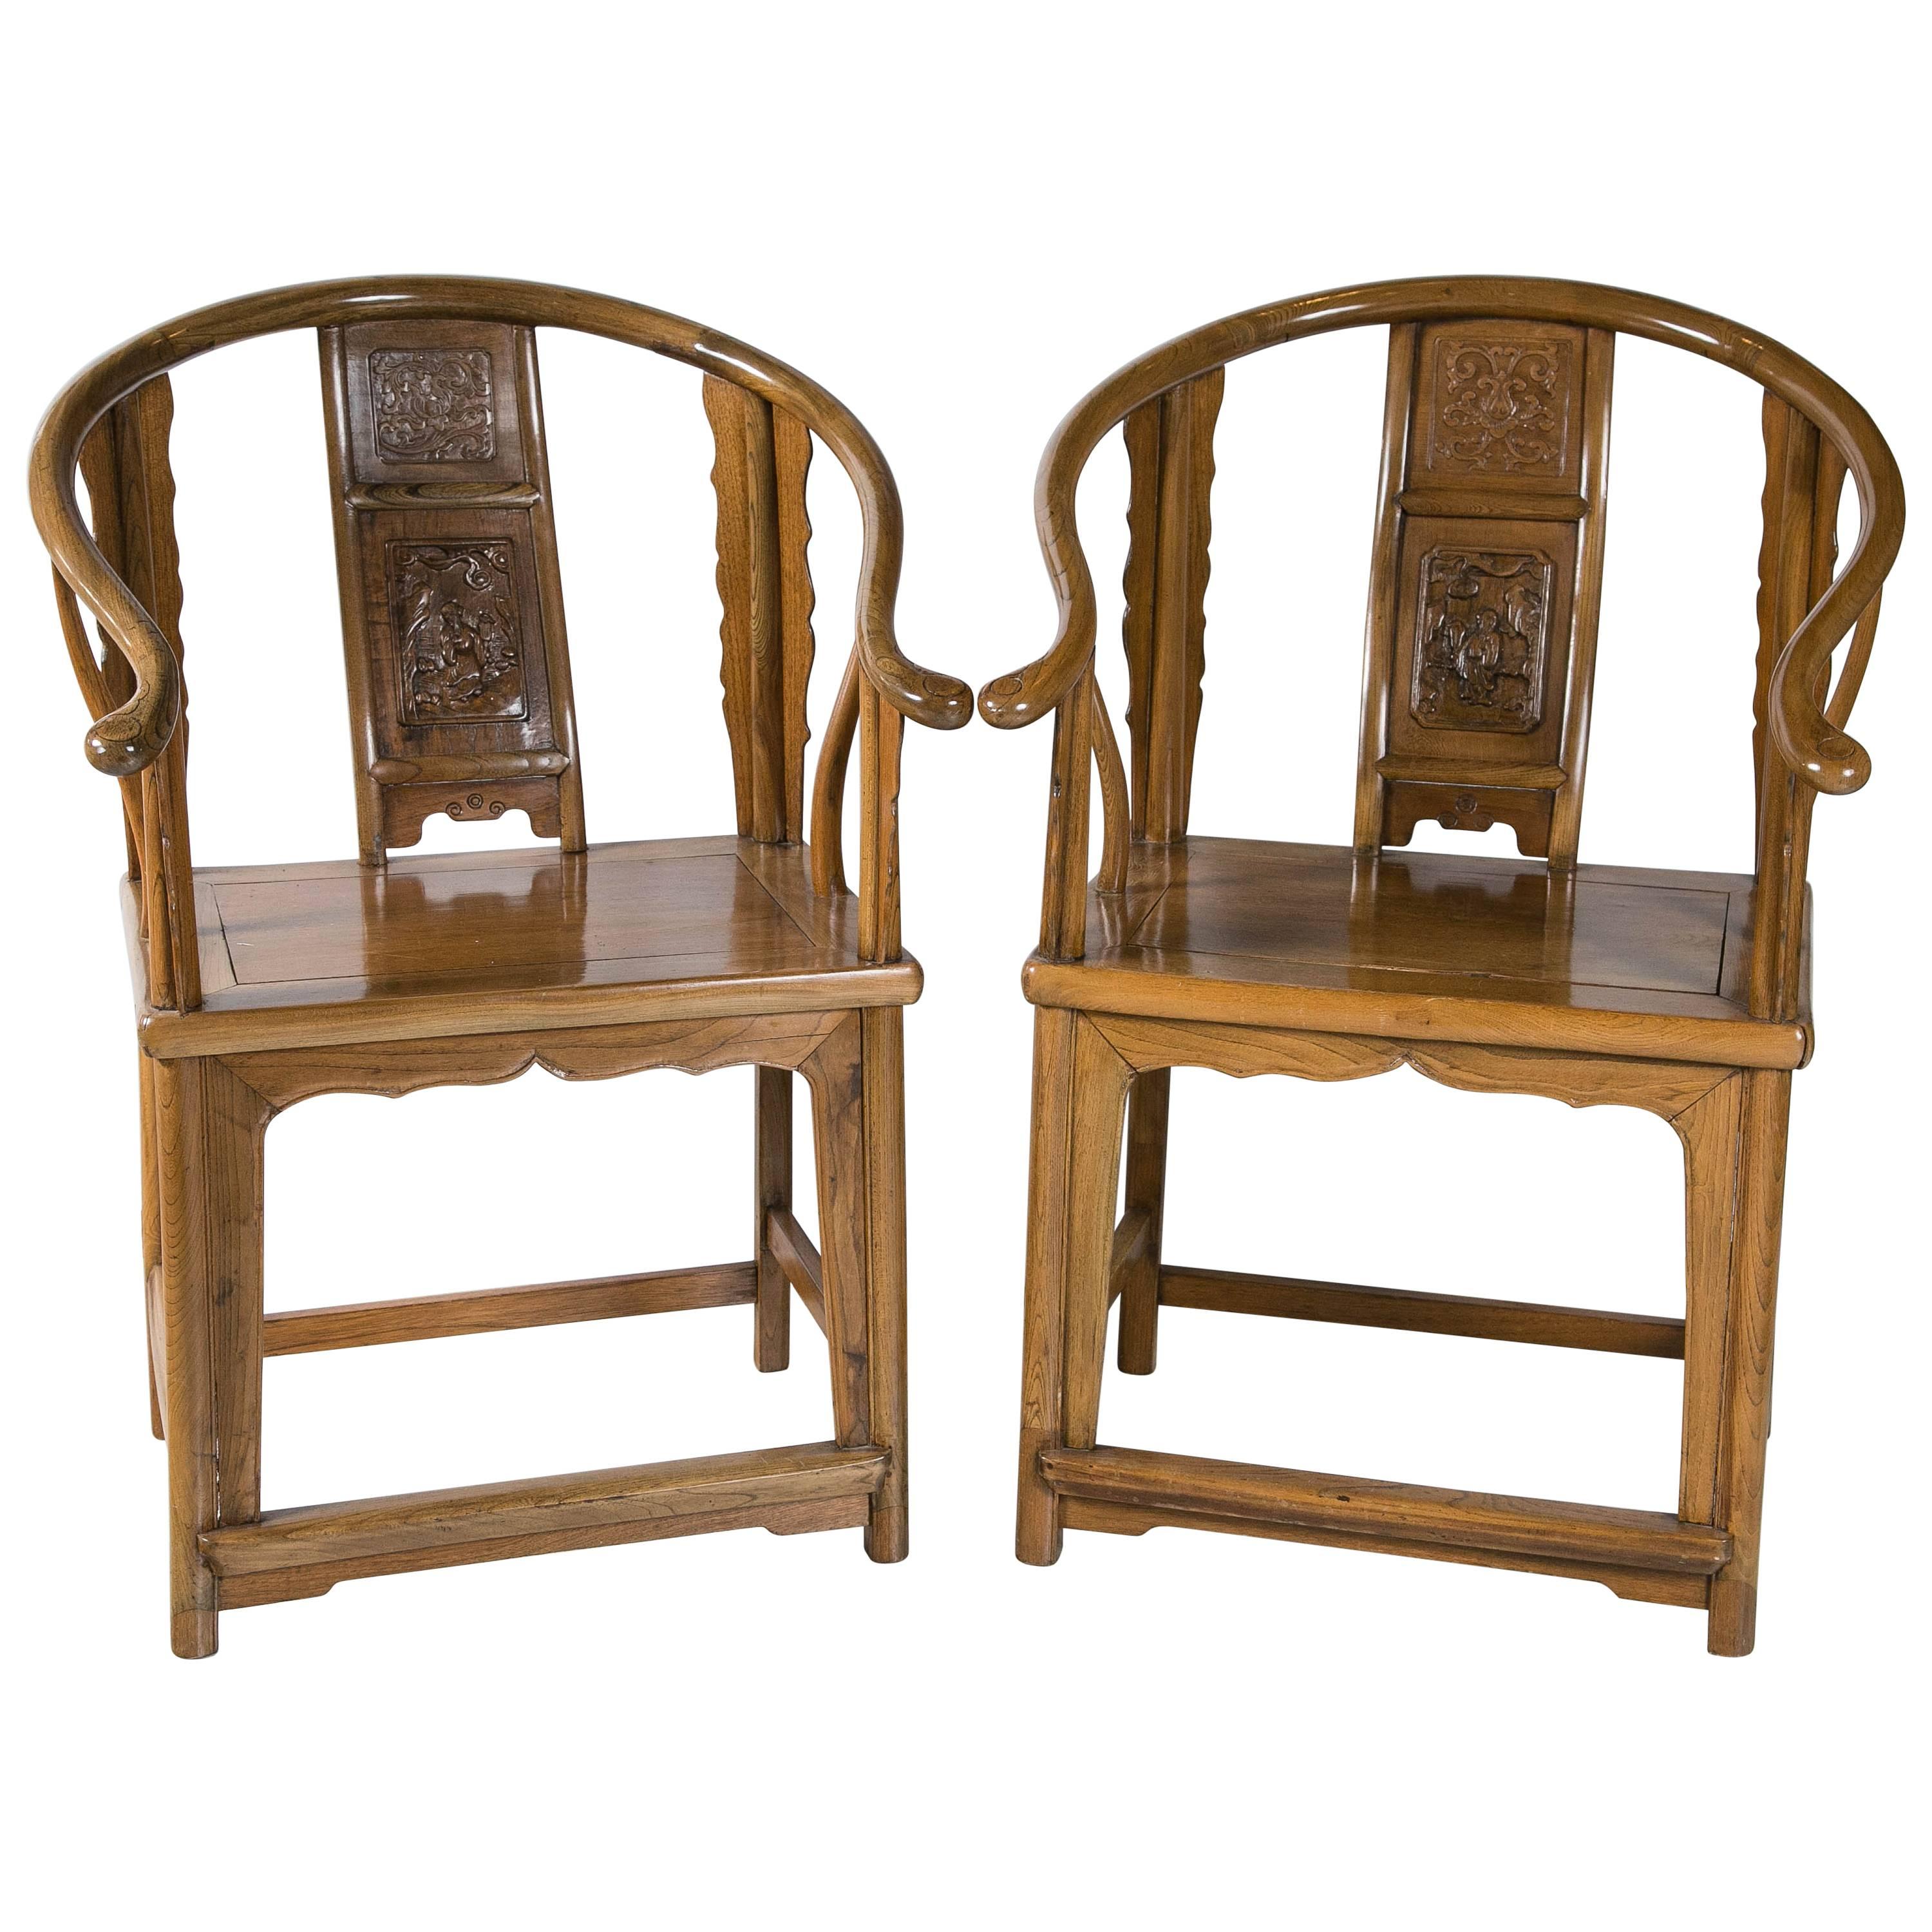 Antique Chinese Horseshoe Chairs, 19th Century For Sale